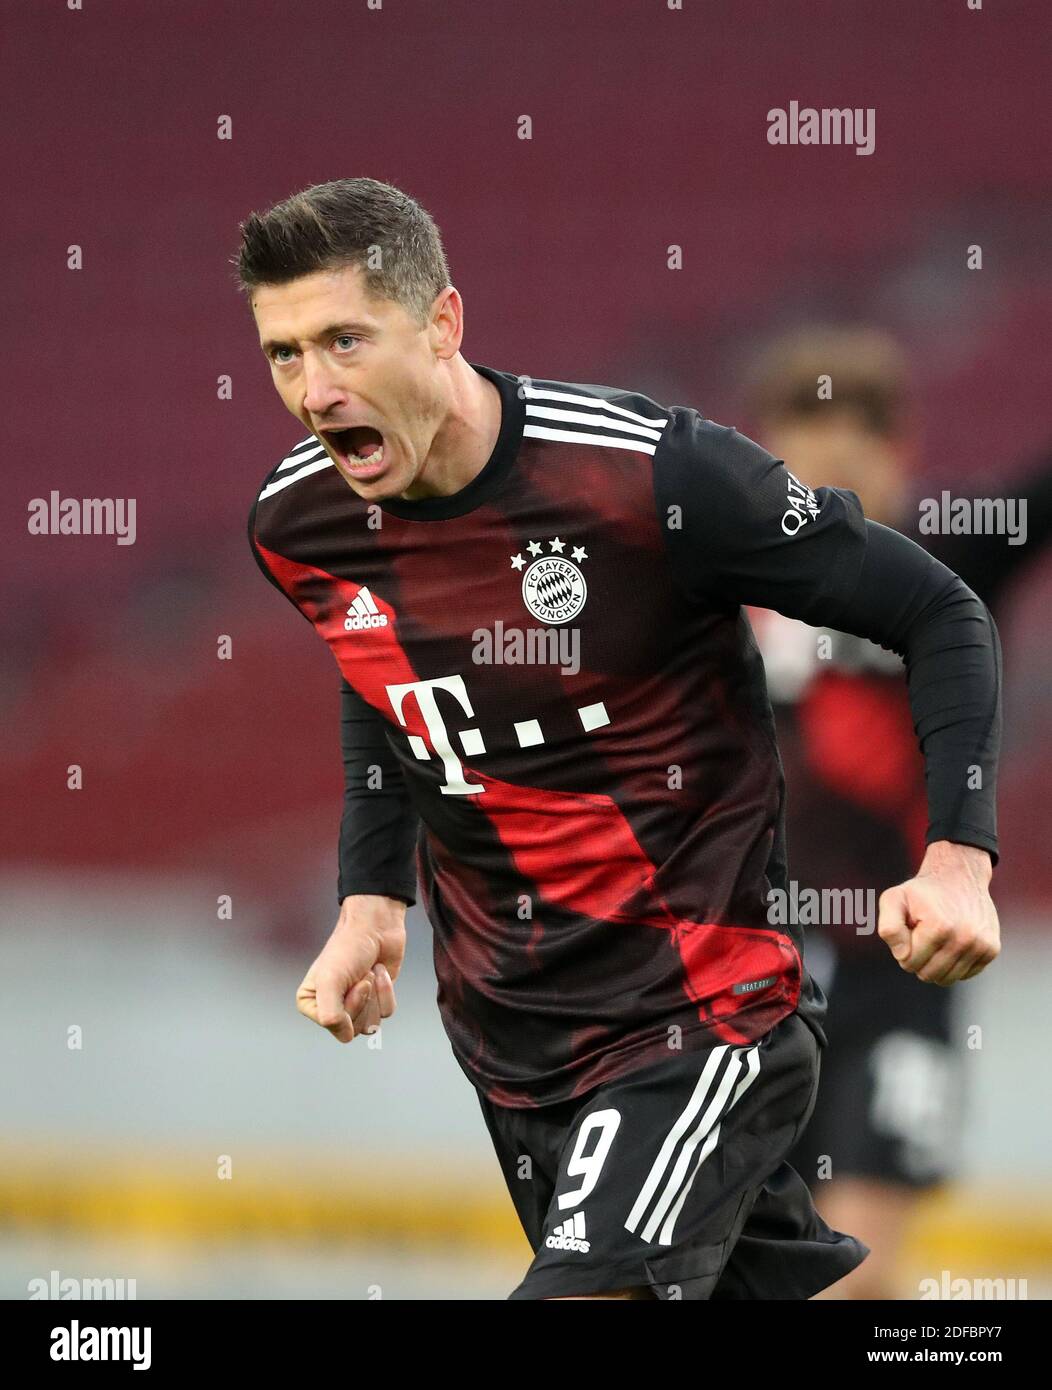 Deutsche fussball High Resolution Stock Photography and Images - Alamy